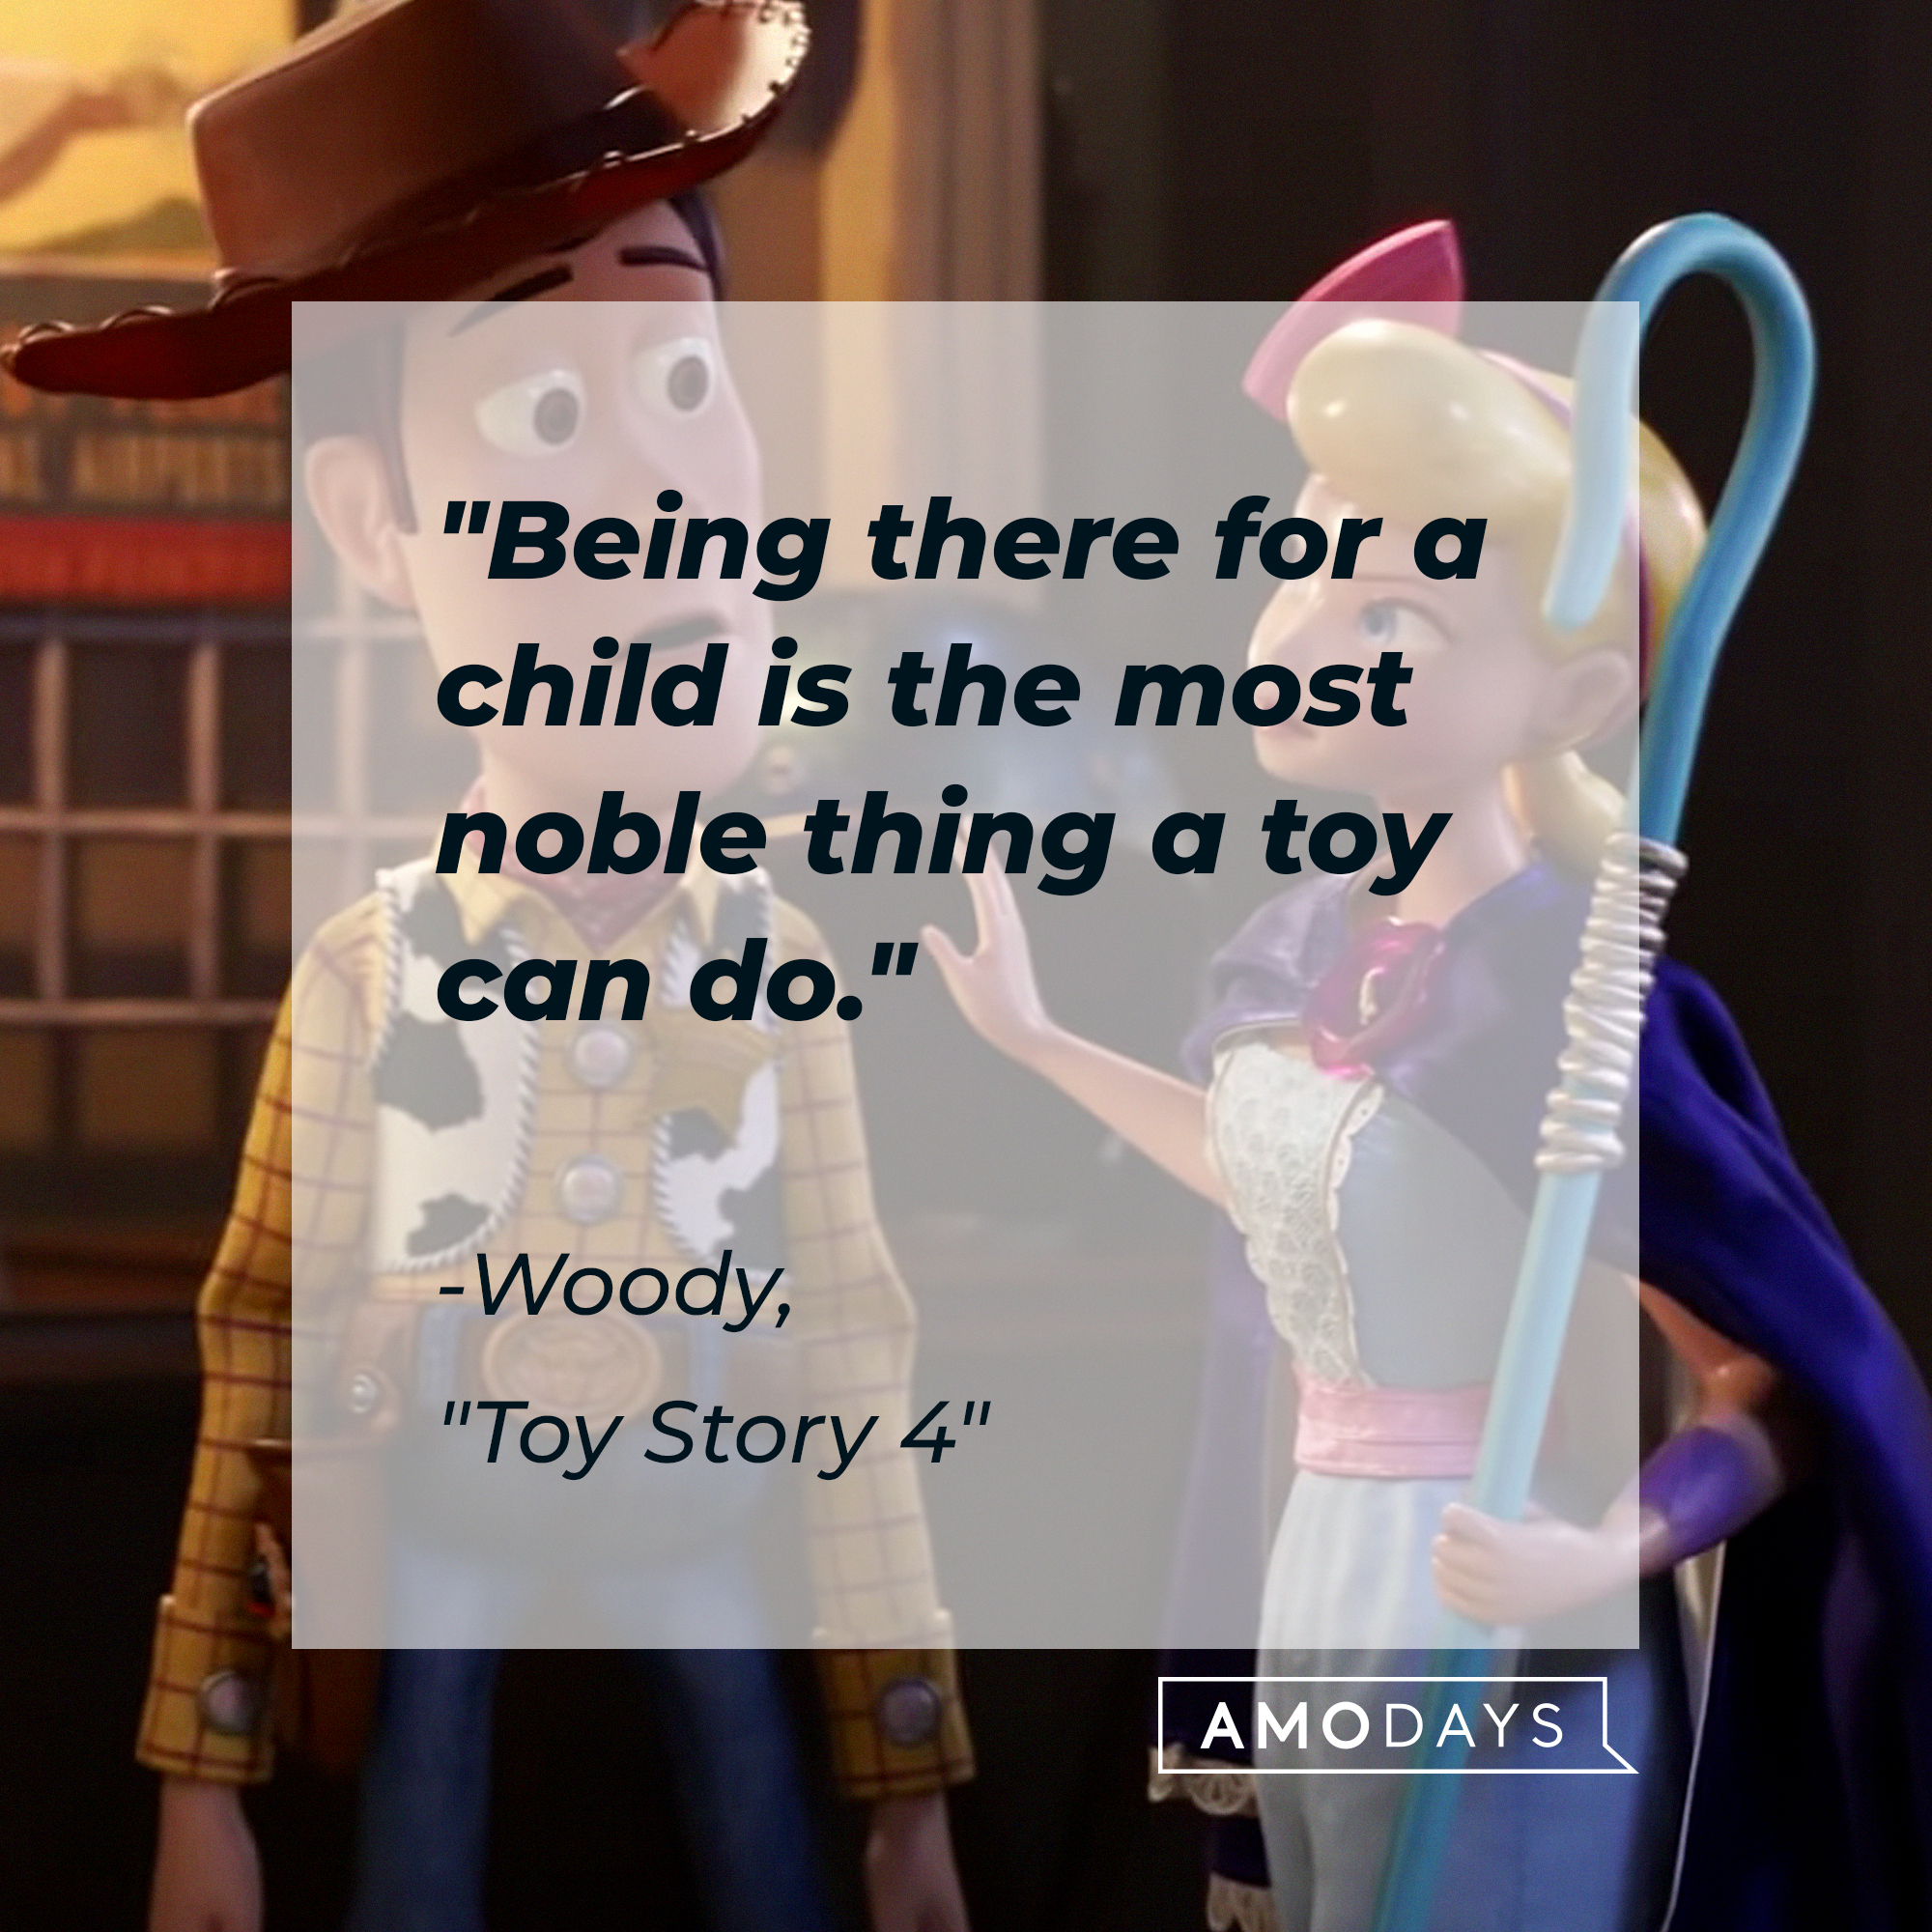 Woody's quote: "Being there for a child is the most noble thing a toy can do." | Source: Youtube.com/Pixar